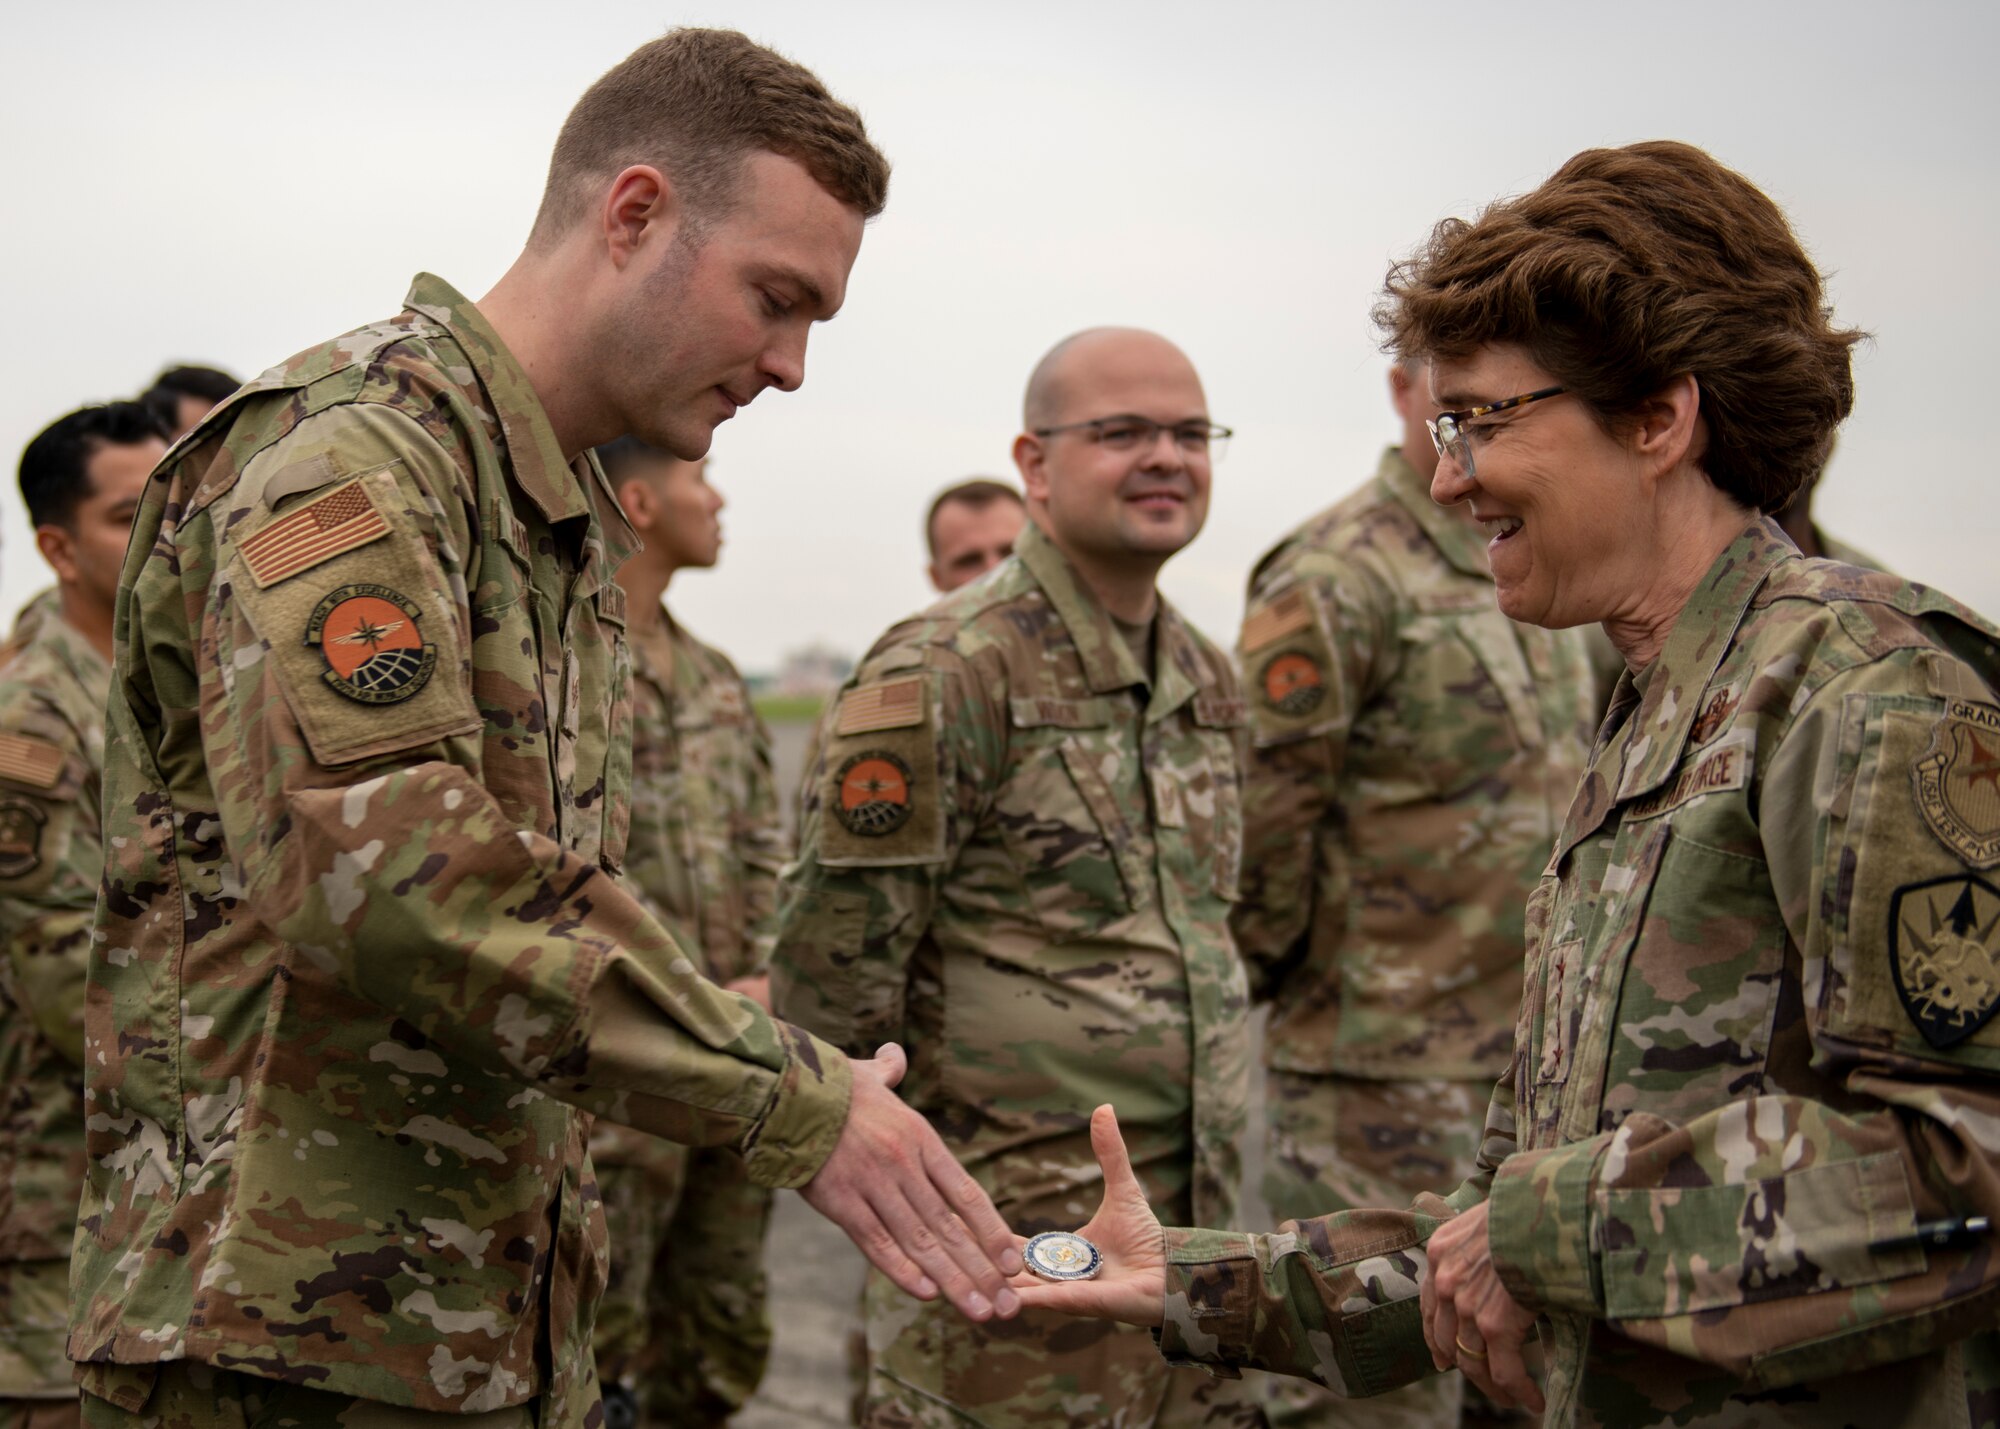 A female general hands a coin to a sergeant on a flight line